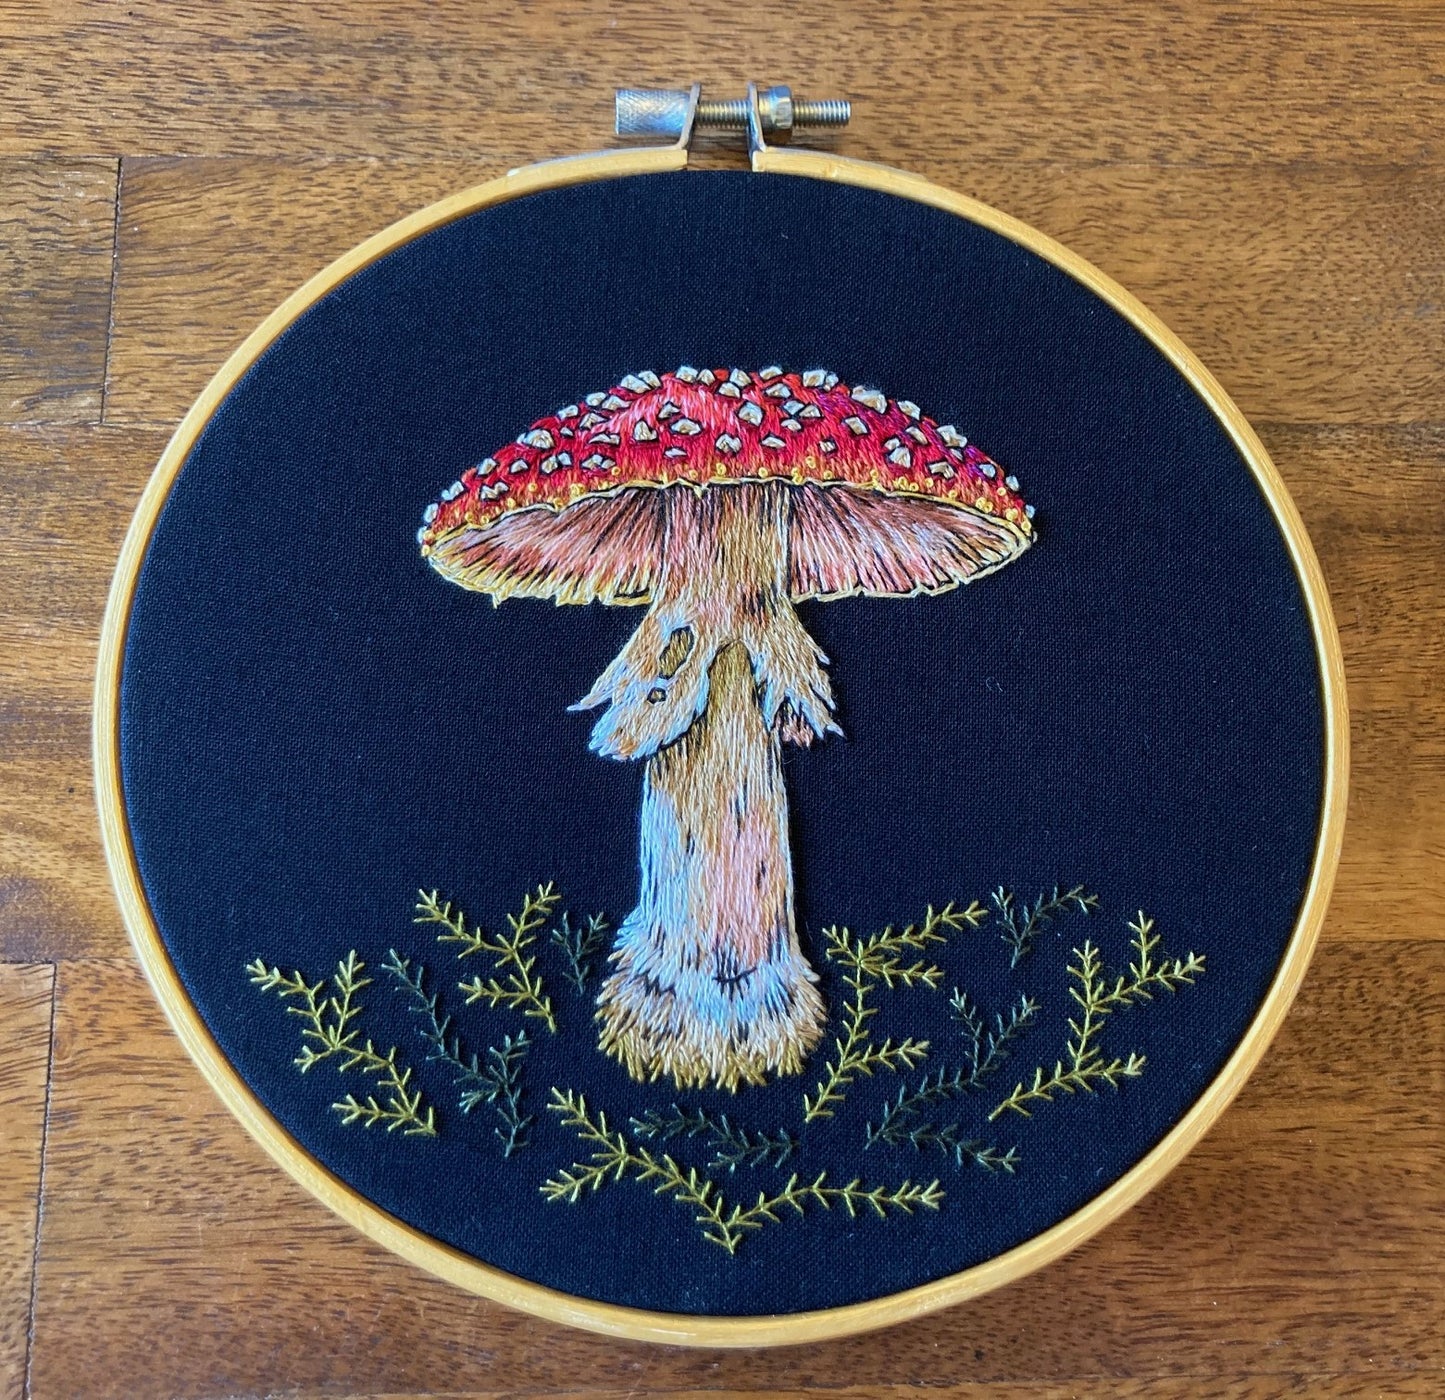 an embroidered mushroom with a spotted red cap and a shaggy stem stands among green embroidered moss on a black fabric in a round gold hoop